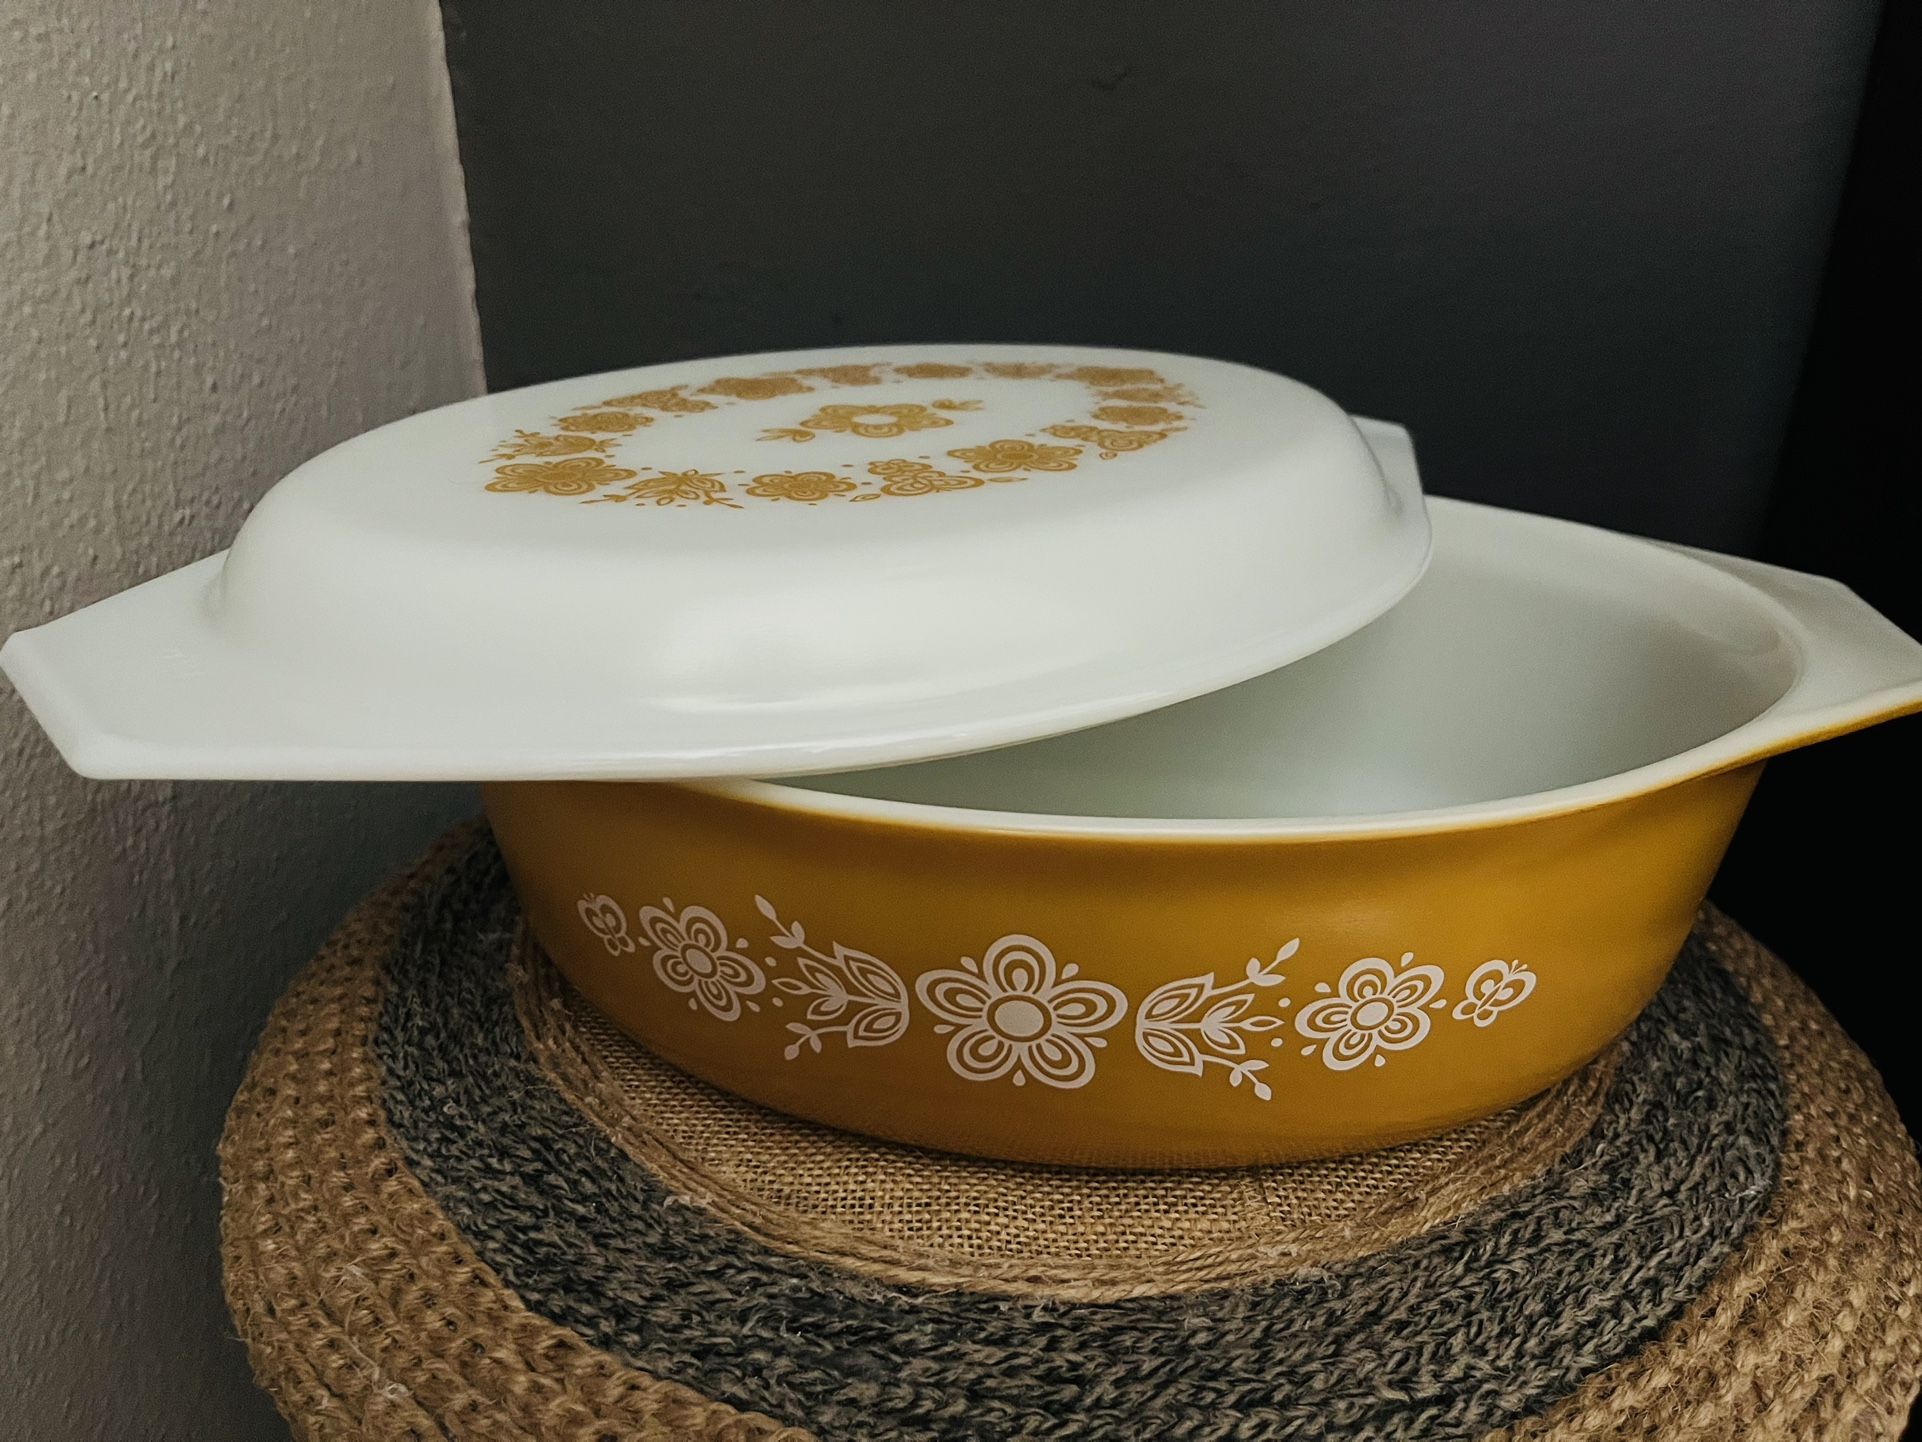 Vintage Pyrex Butterfly Gold Covered Casserole - 2 1/2 Quart Pyrex Covered Casserole Dish - Mid C